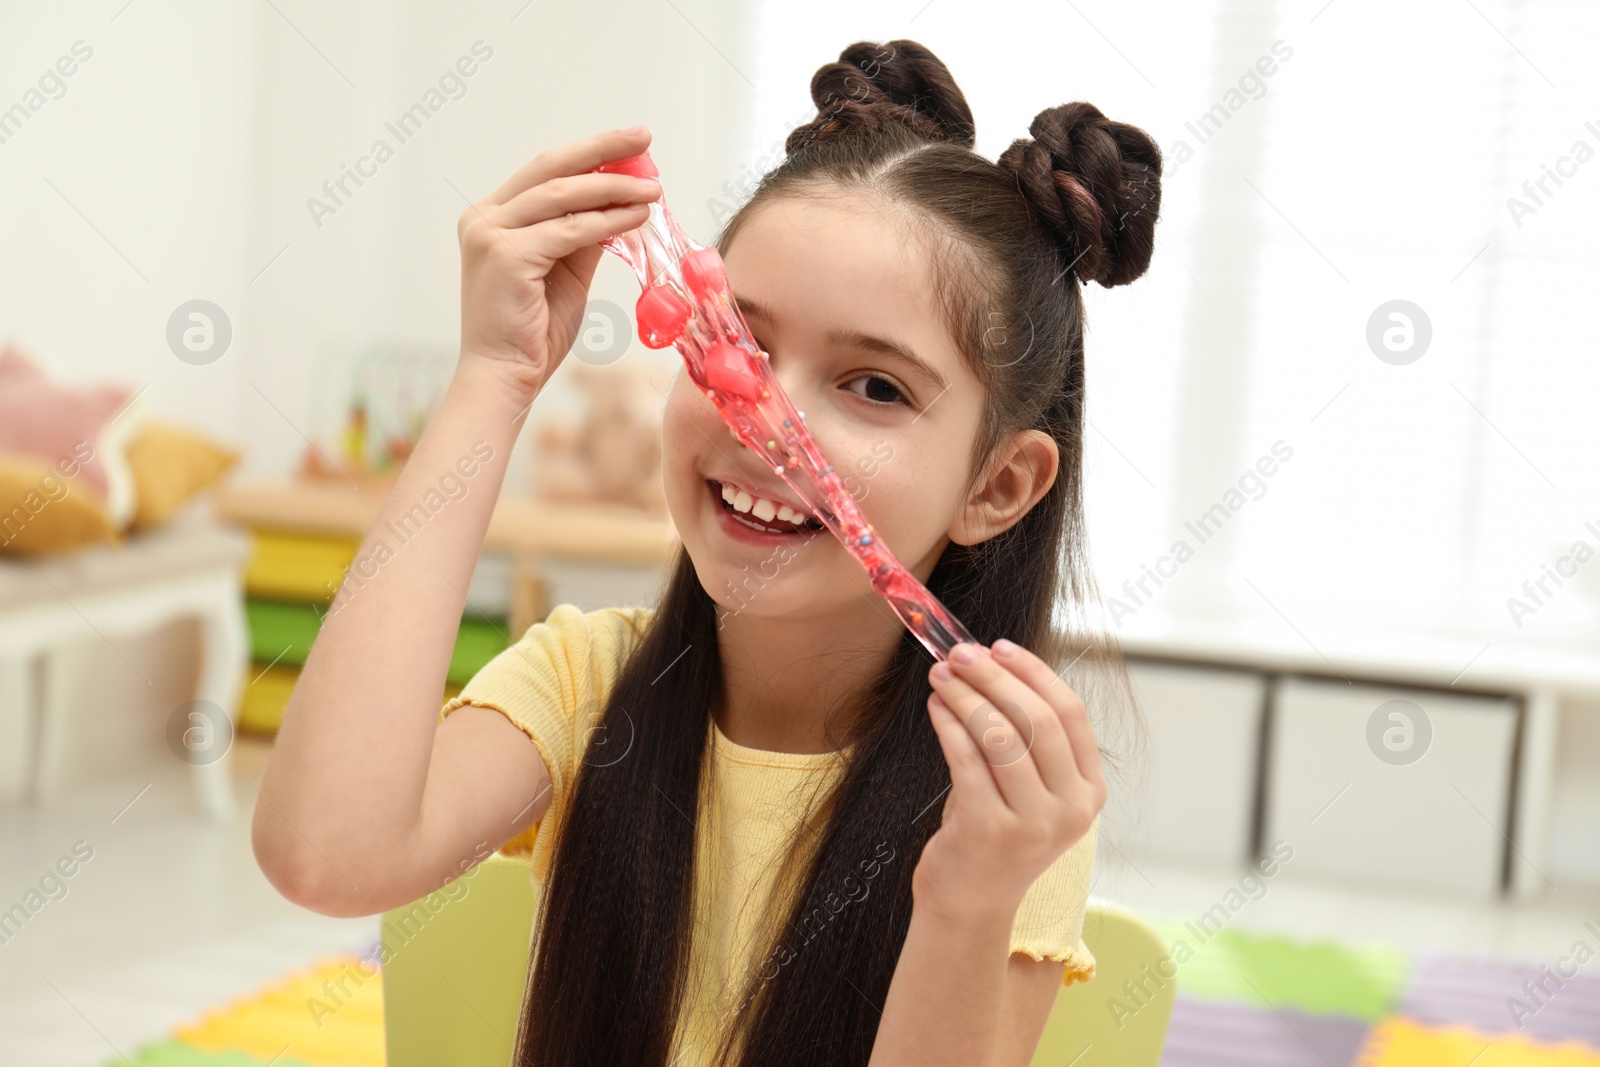 Photo of Little girl playing with slime in room